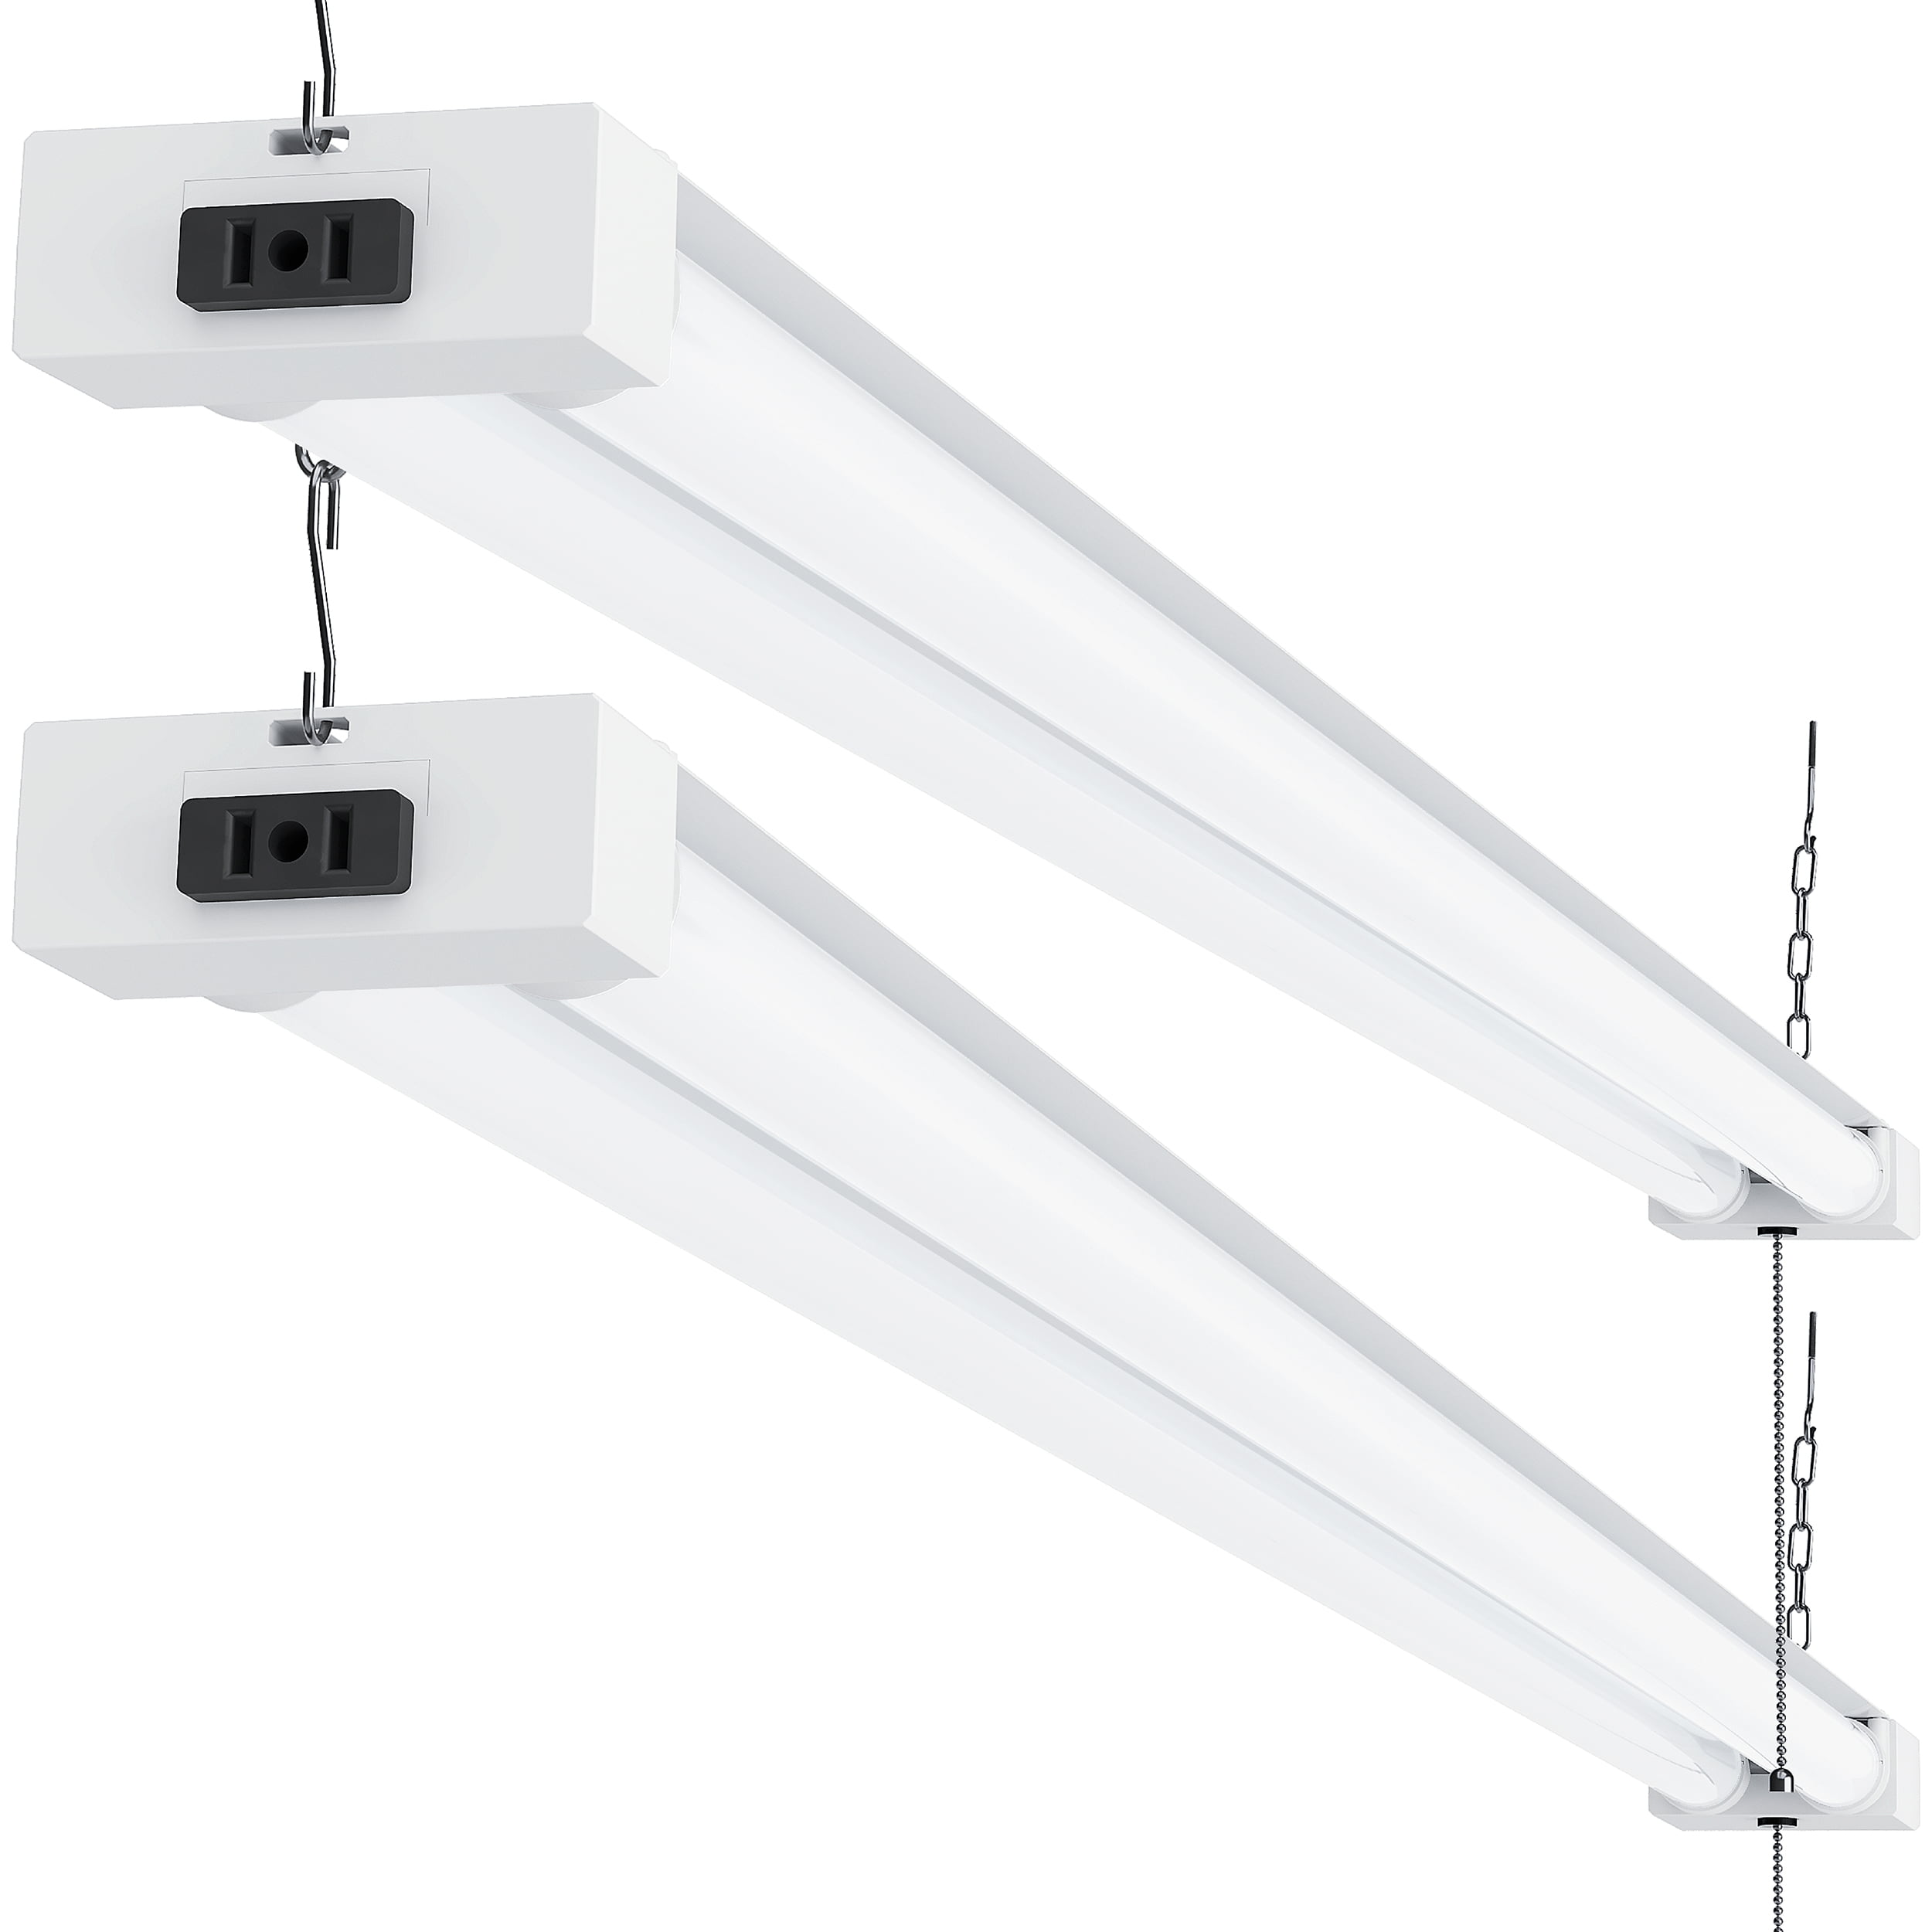 260W 48" LONG 4000K COOL SUNCO SHOP LIGHT UTILITY LED 40W FROSTED 2 PACK